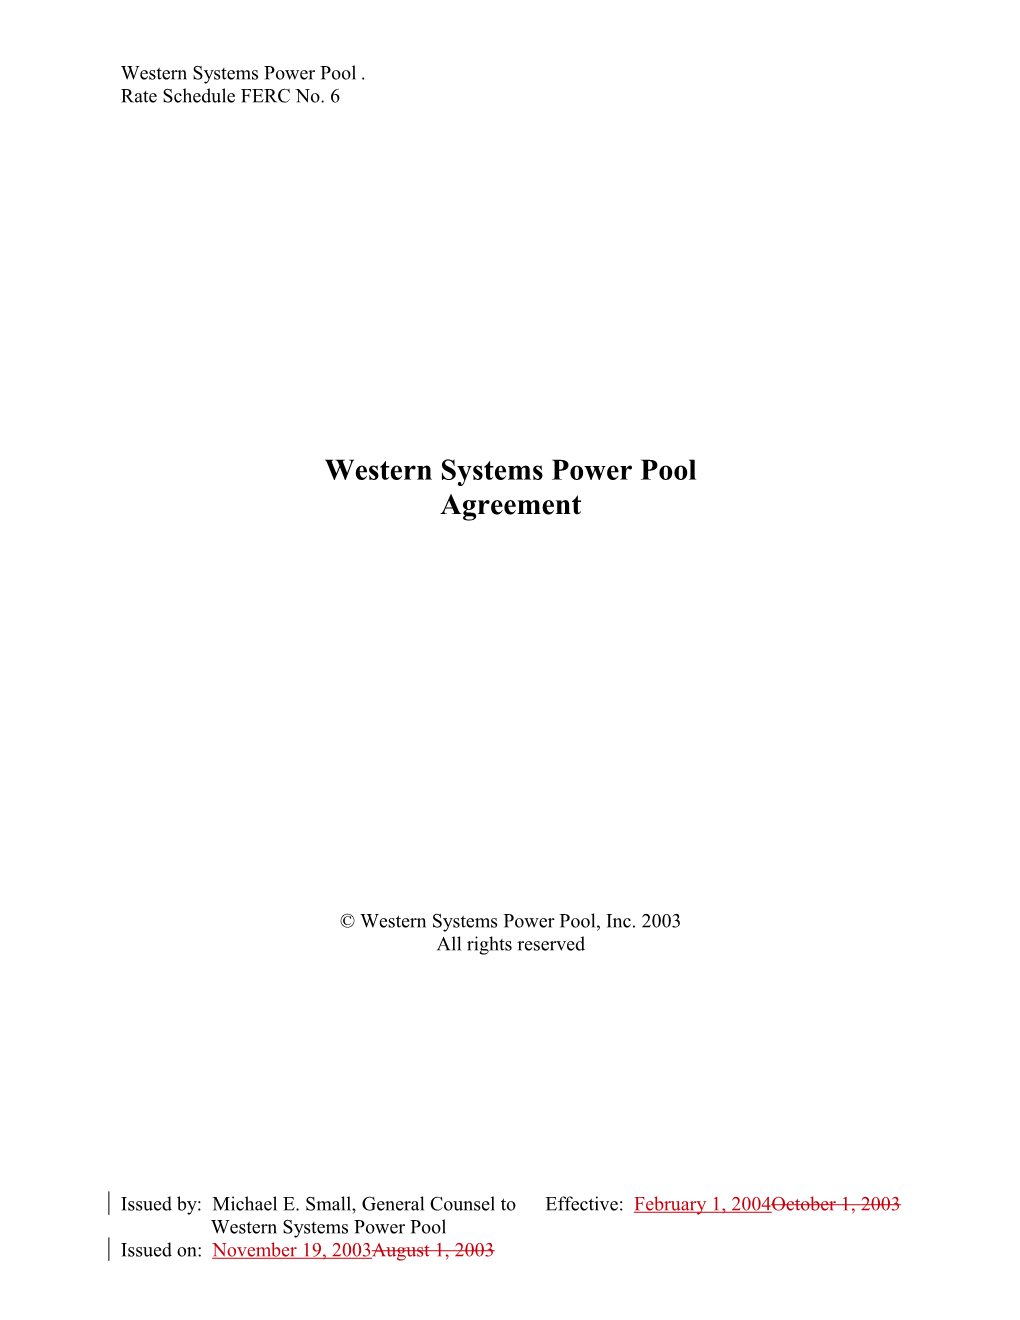 Western System Power Pool Agreement, Effective February 1, 2004 (Redlined) (Copyright Western